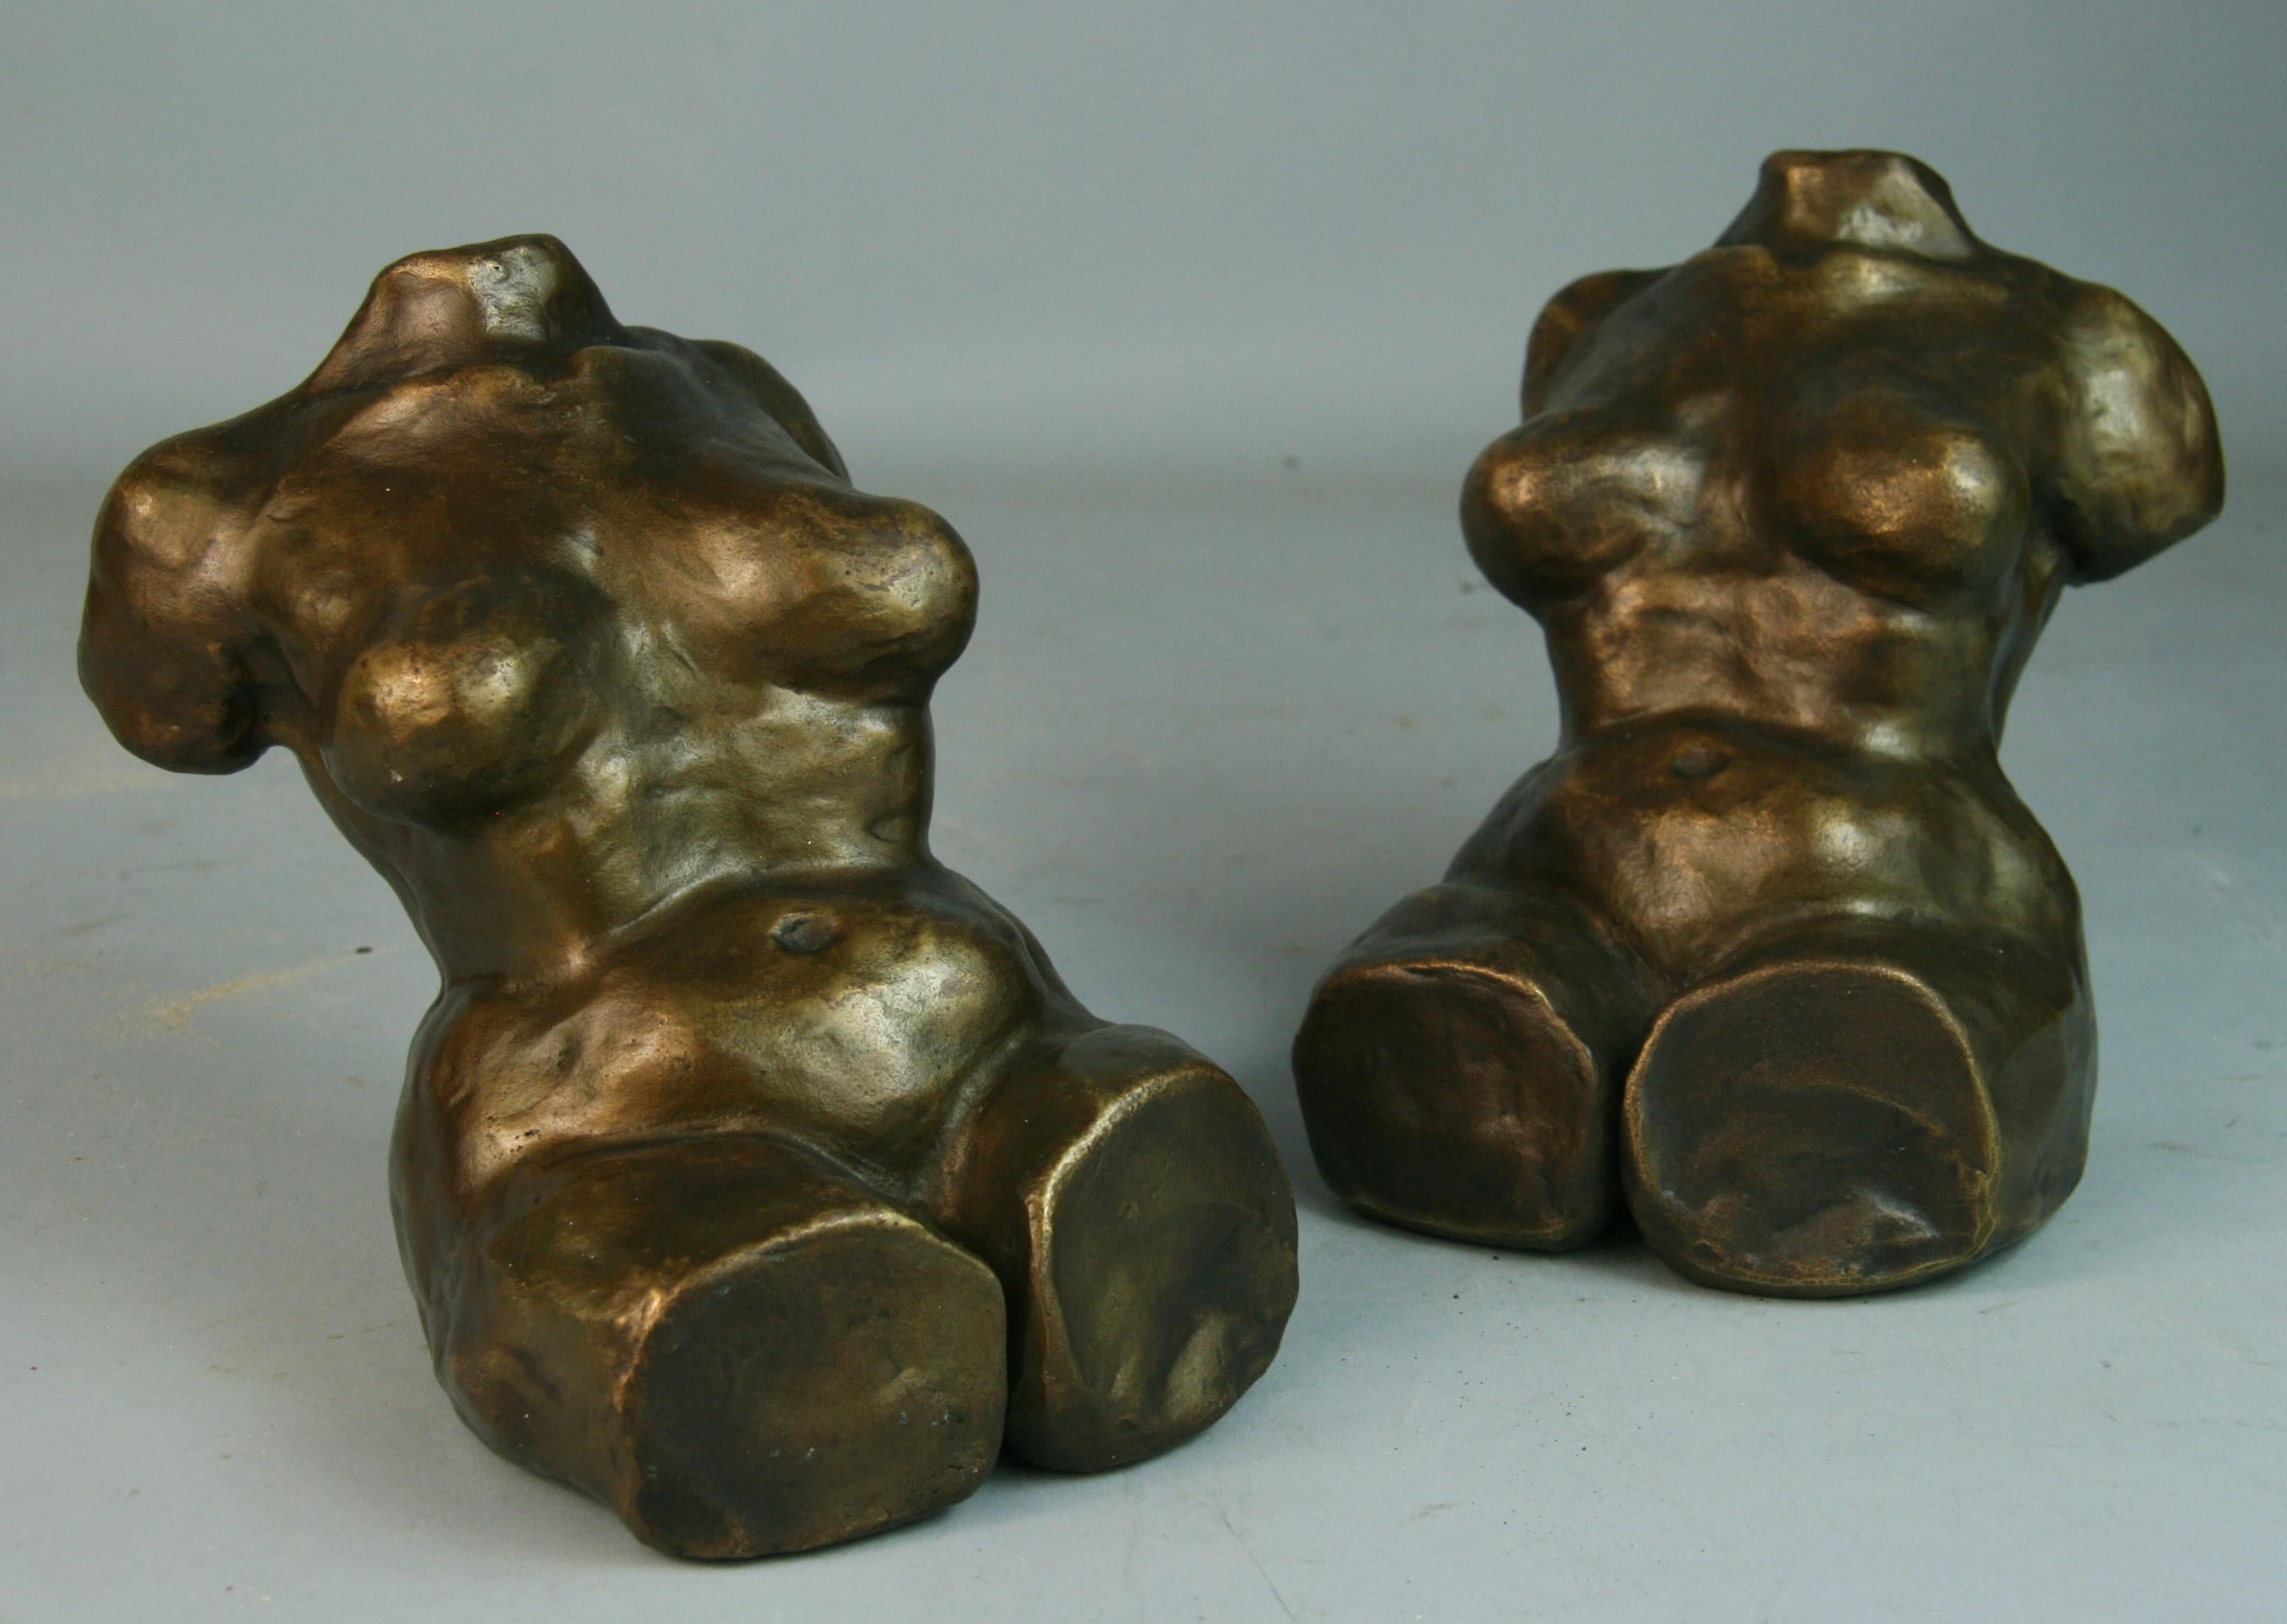 3-720 heavy cast bronze nude sculptures/bookends
Initialed on bottom CR.